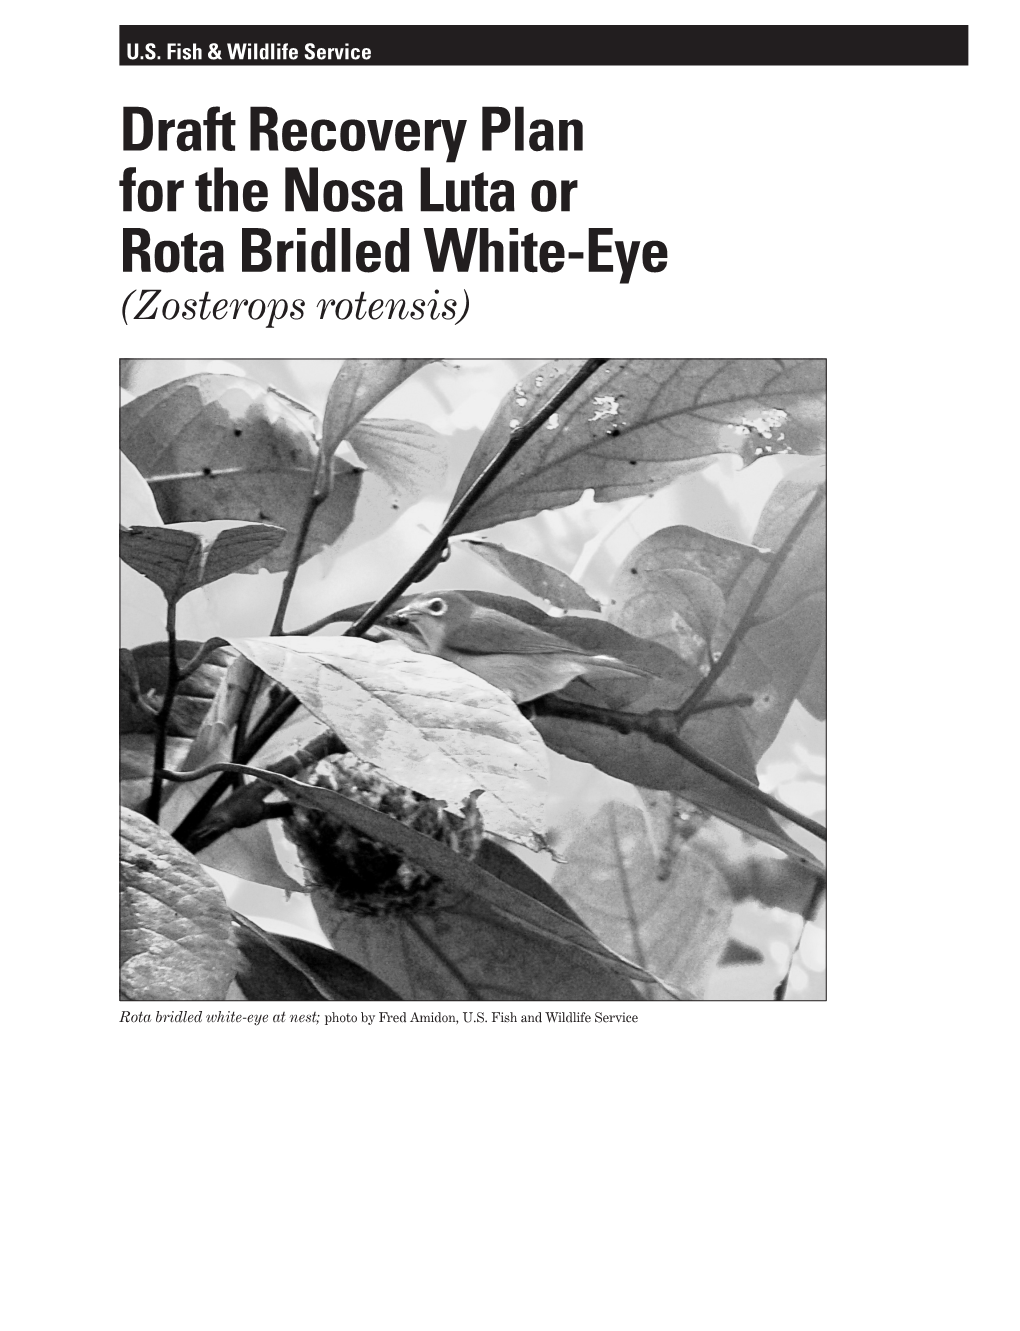 Draft Recovery Plan for the Nosa Luta Or Rota Bridled White-Eye (Zosterops Rotensis)